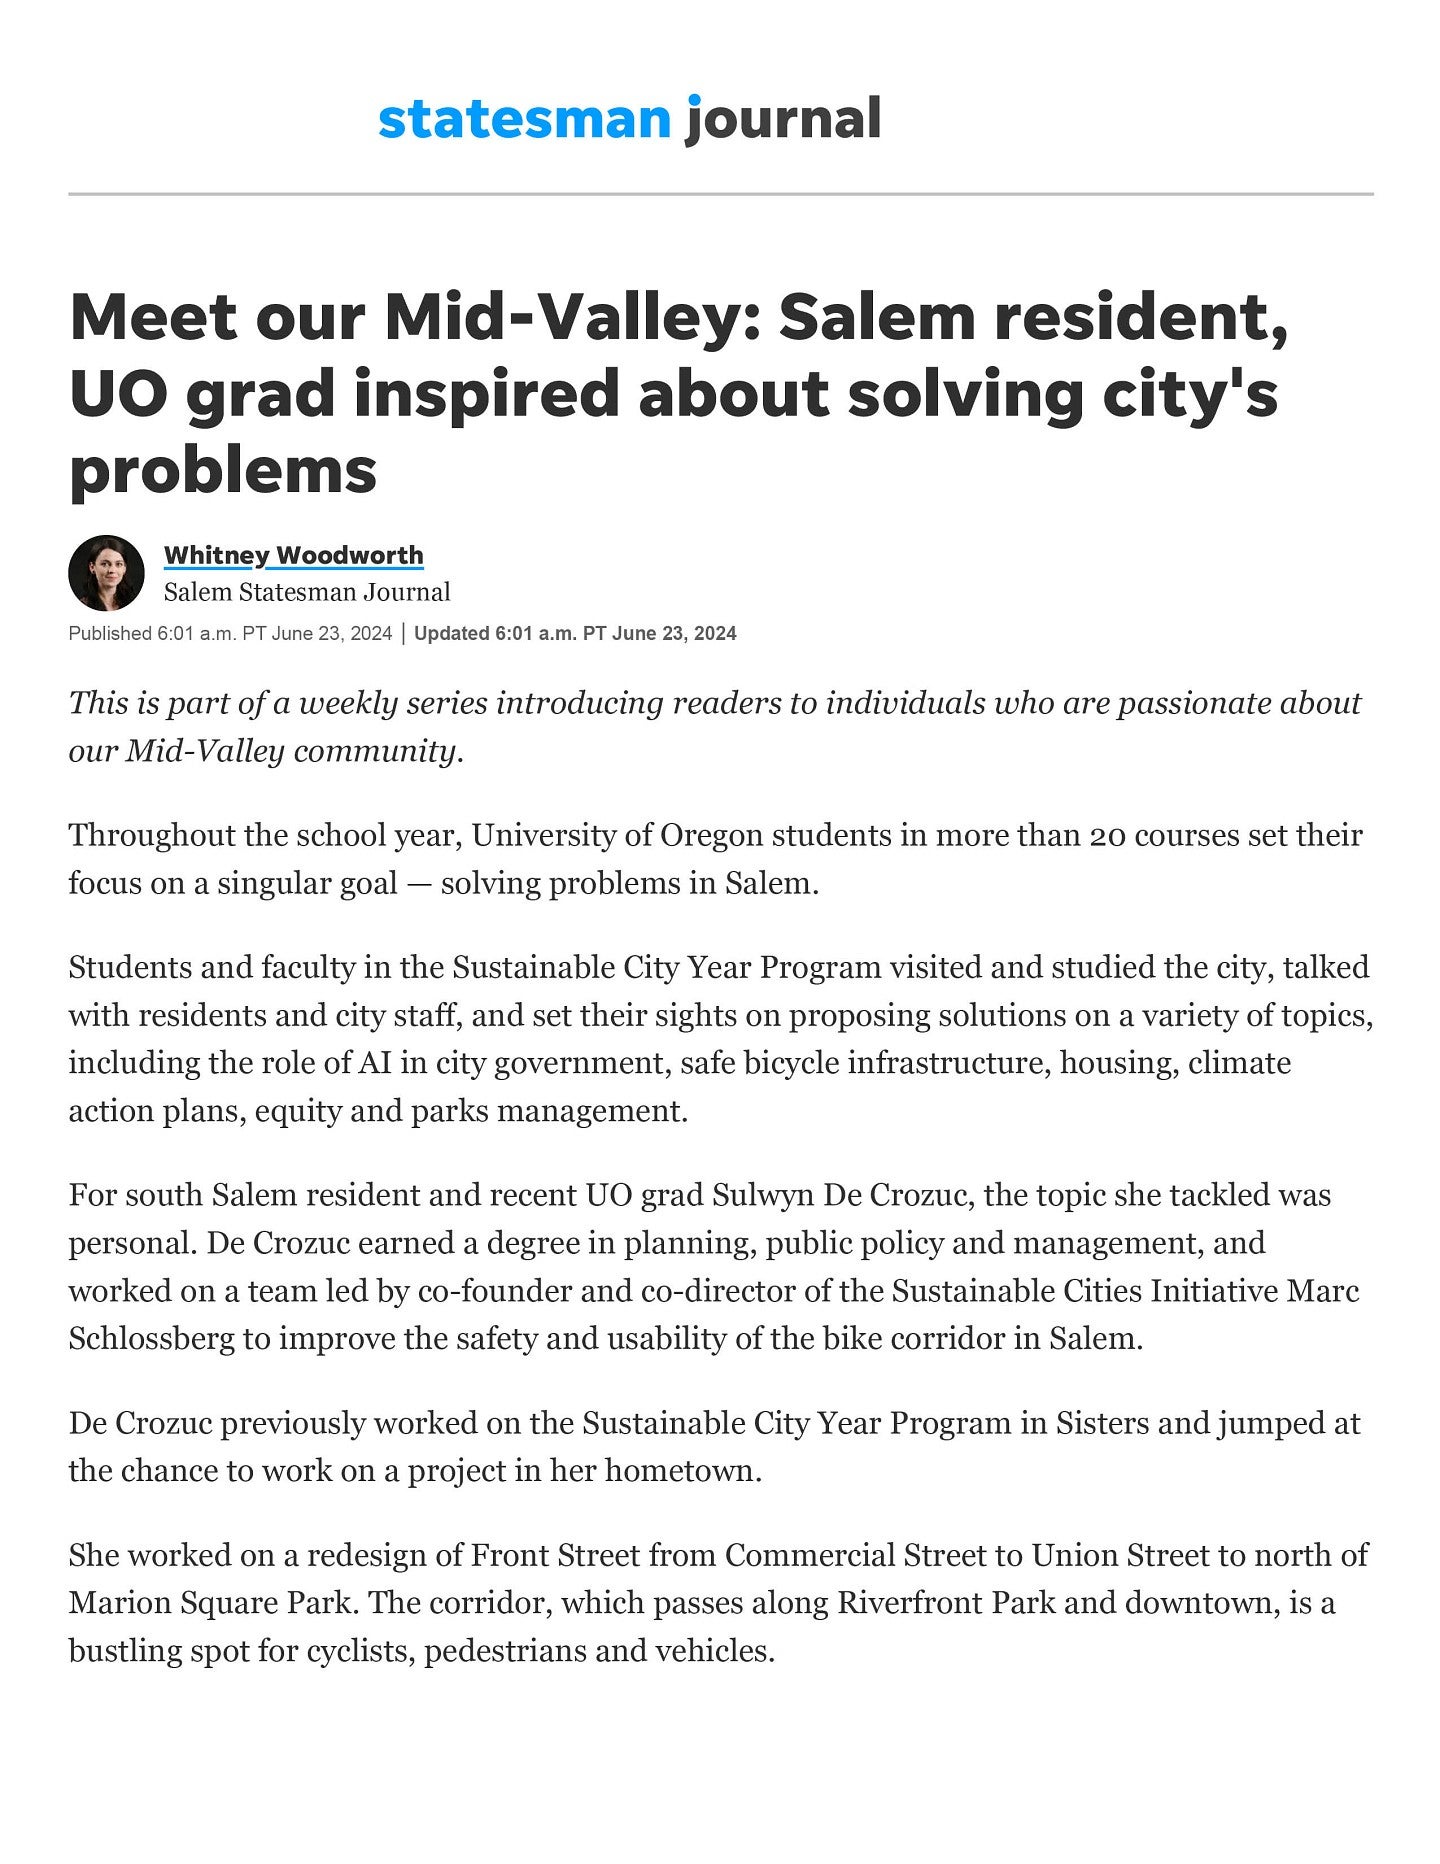 Statesman Journal: Meet our Mid-Valley (1/4)